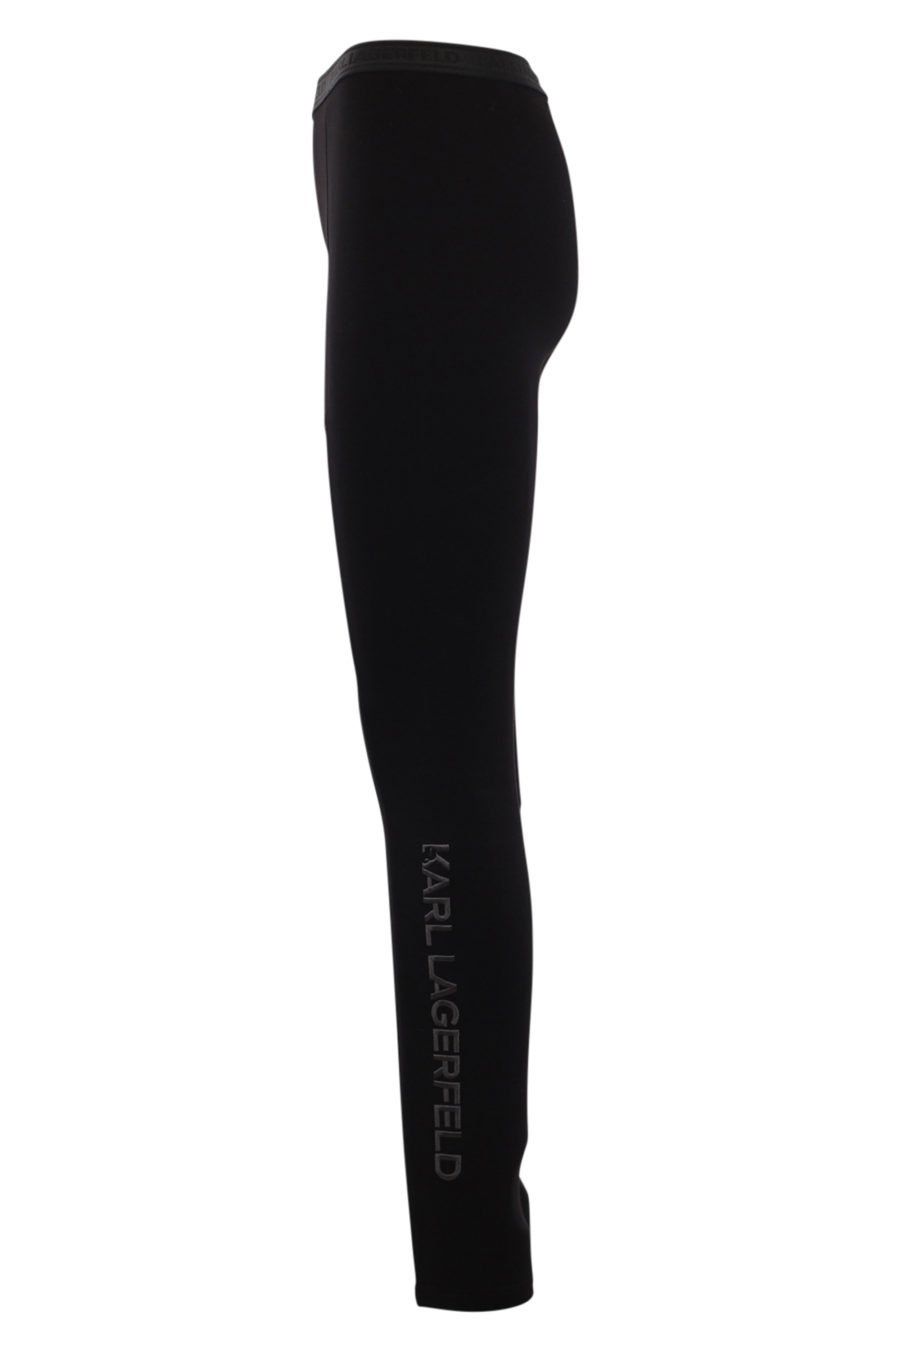 Black leggings with embroidered logo on the side - IMG 0504